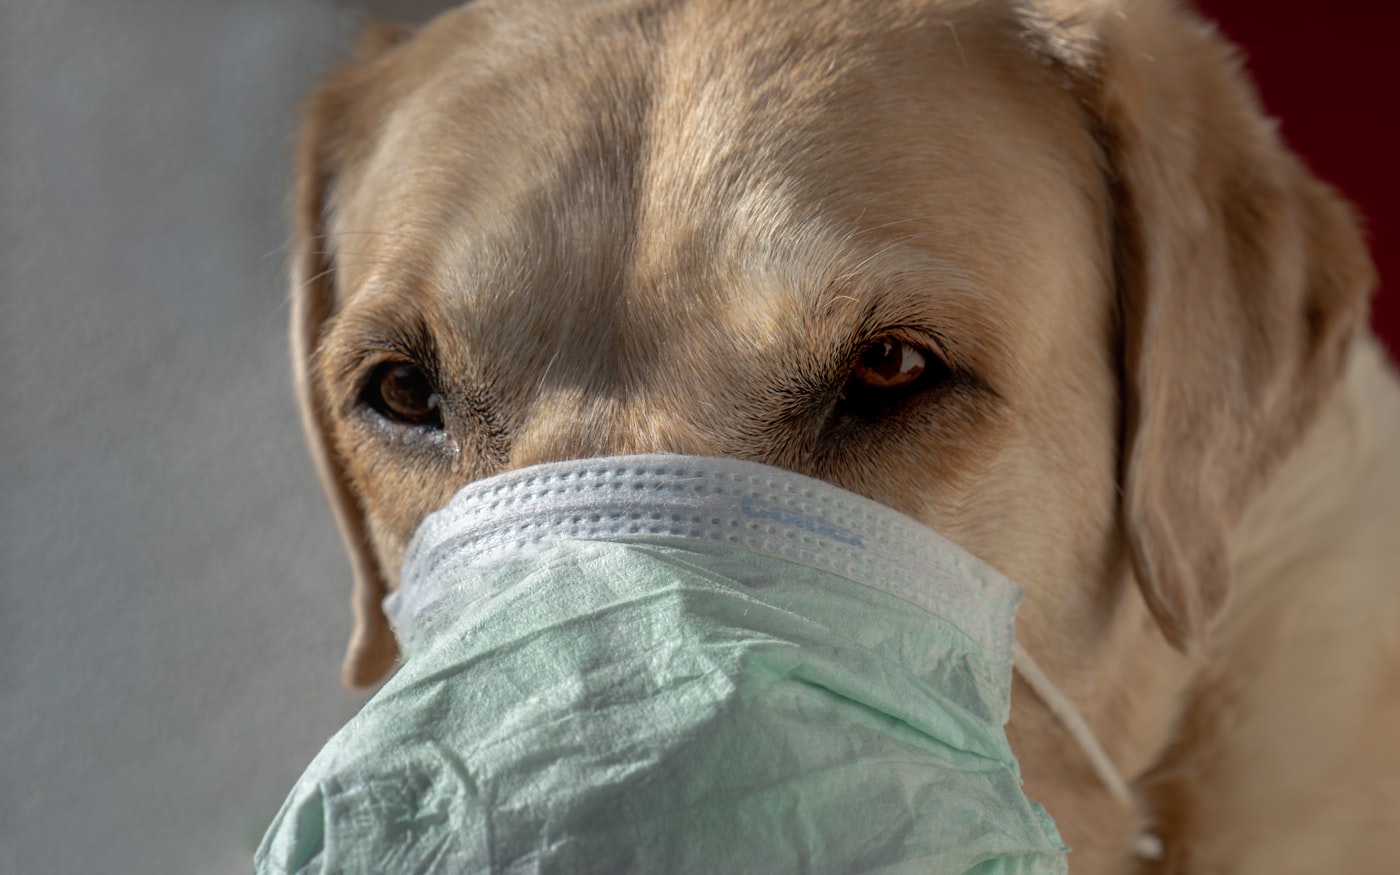 Can Babies Develop Sudden Allergies To Dogs?